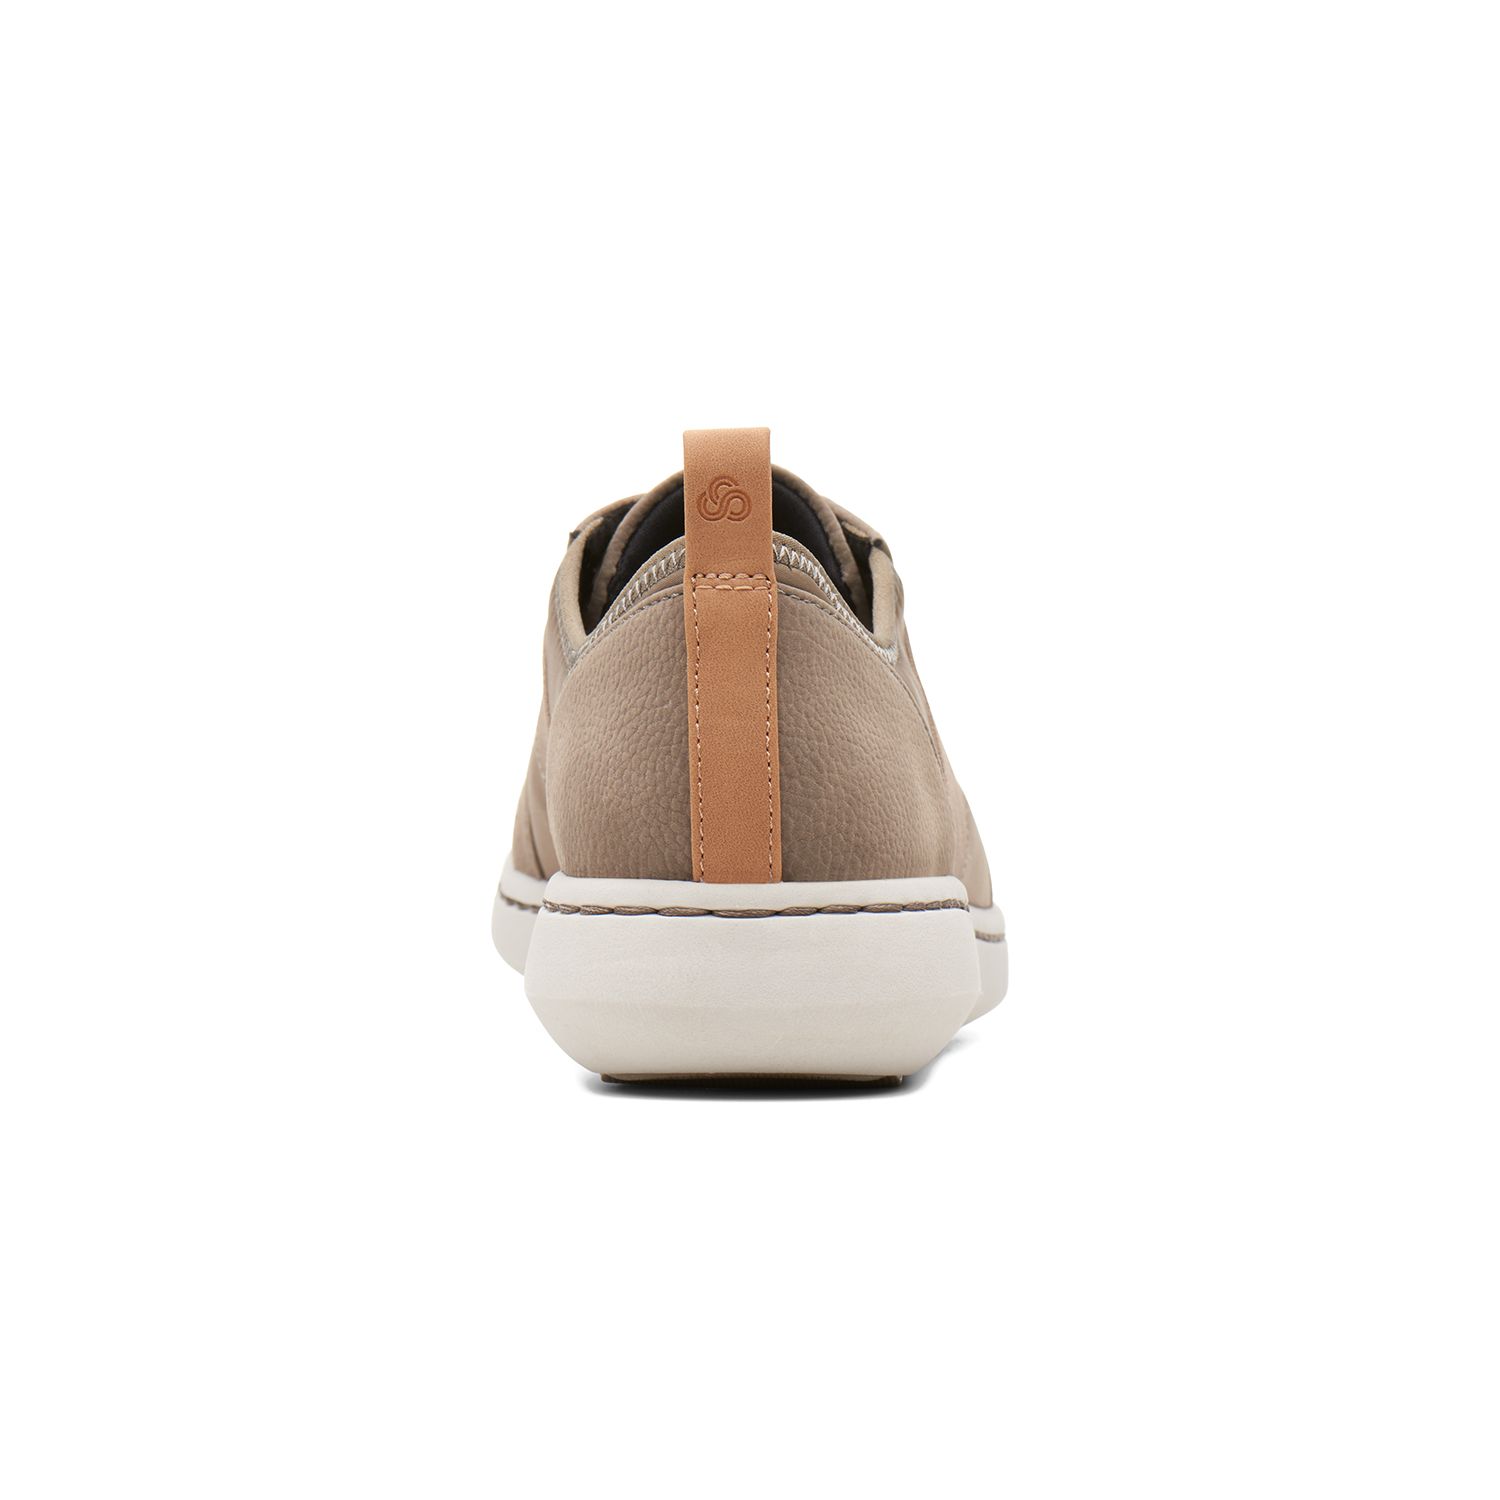 clarks cloudsteppers step move fly women's sneakers